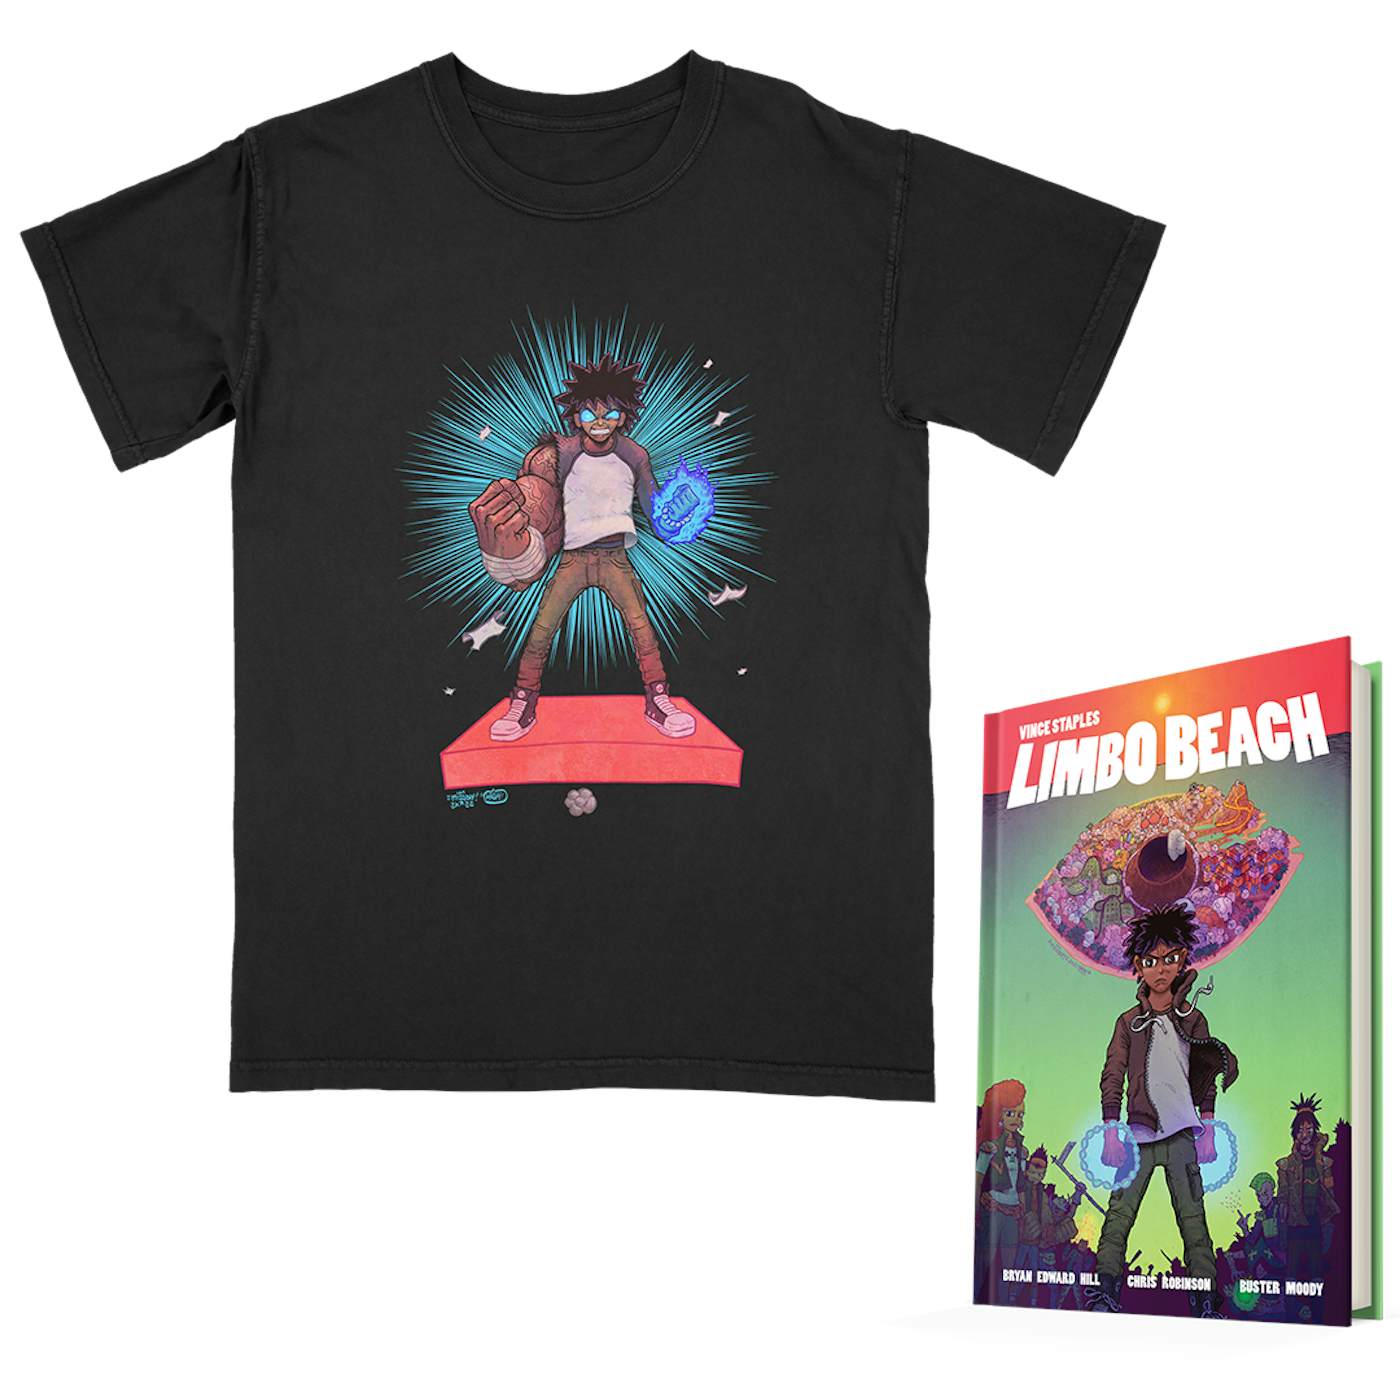  Vince Staples - "Super Vince" T-Shirt and Signed Book